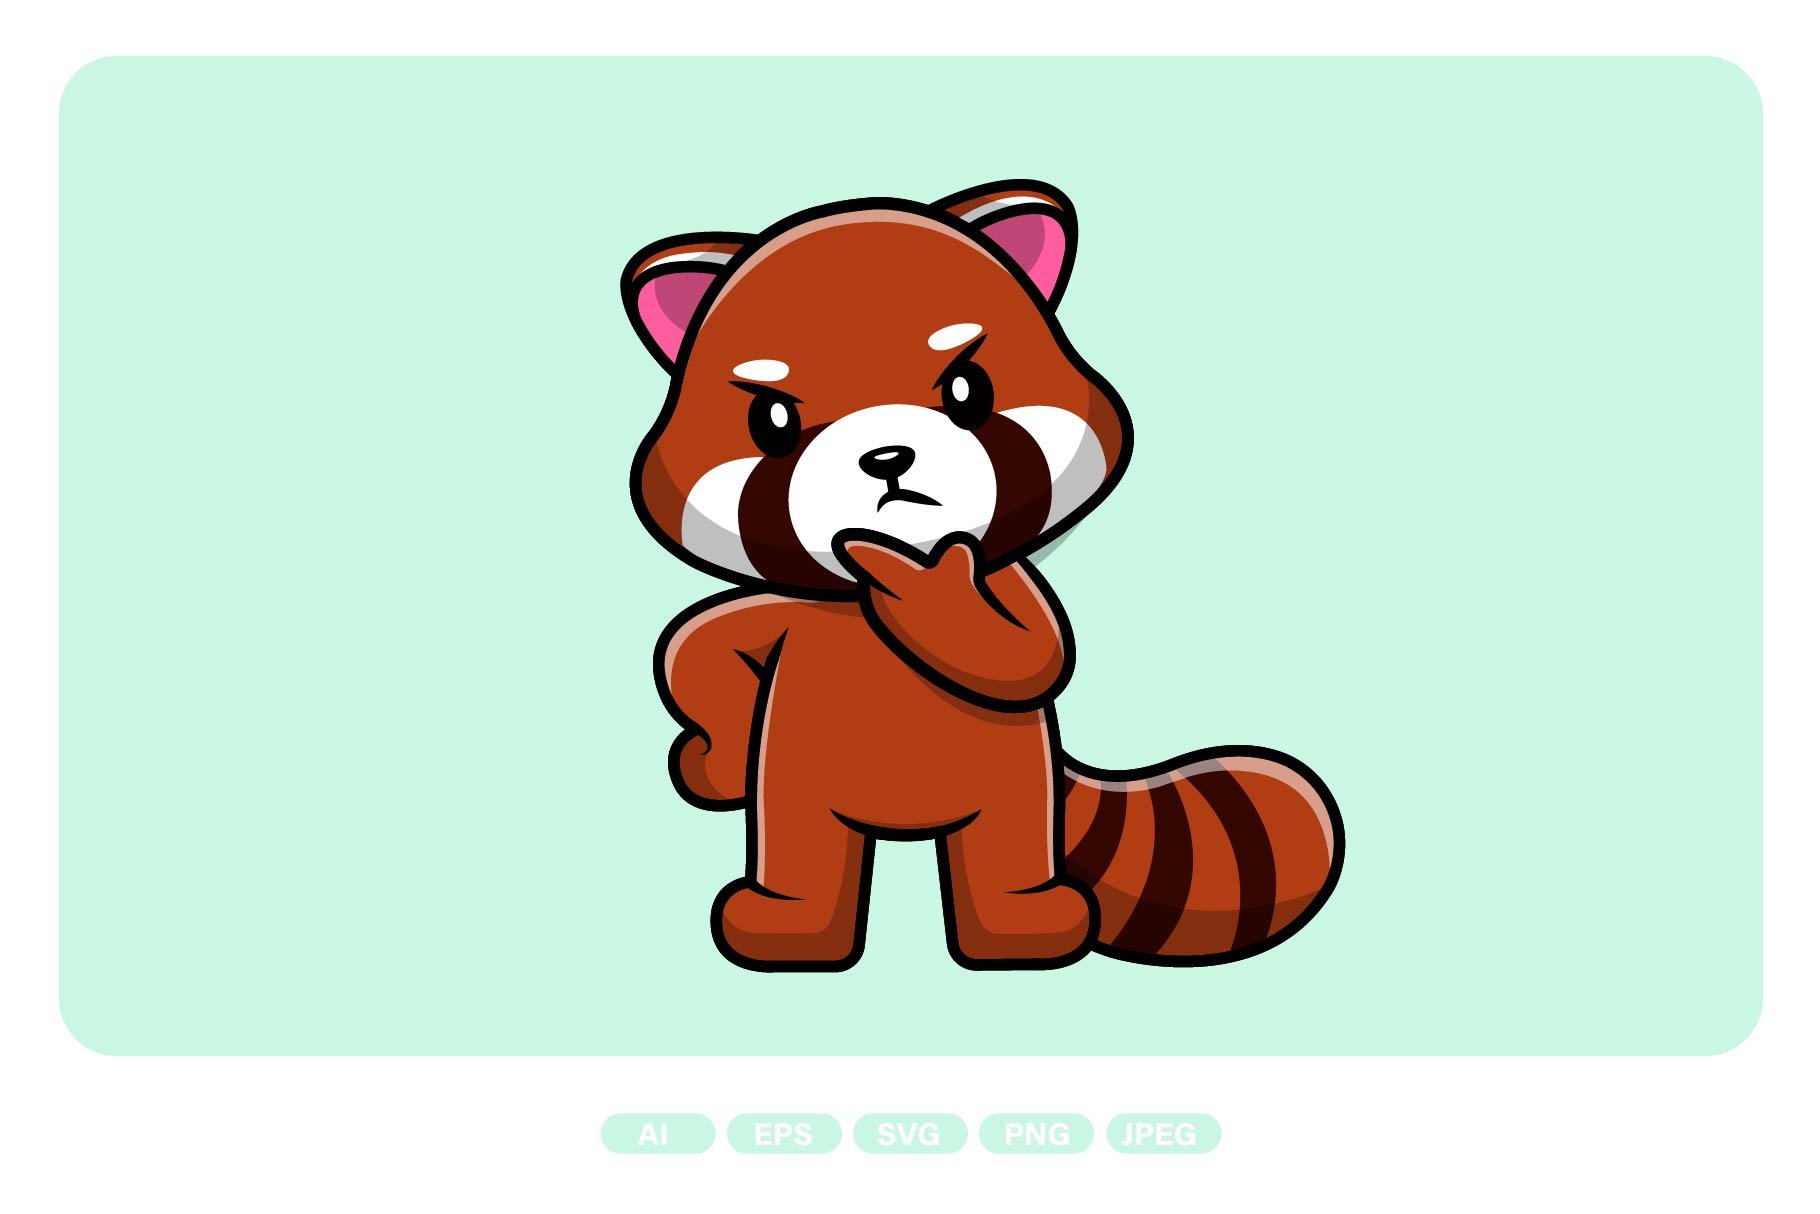 Cute Red Panda Thinking Seriuous cover image.